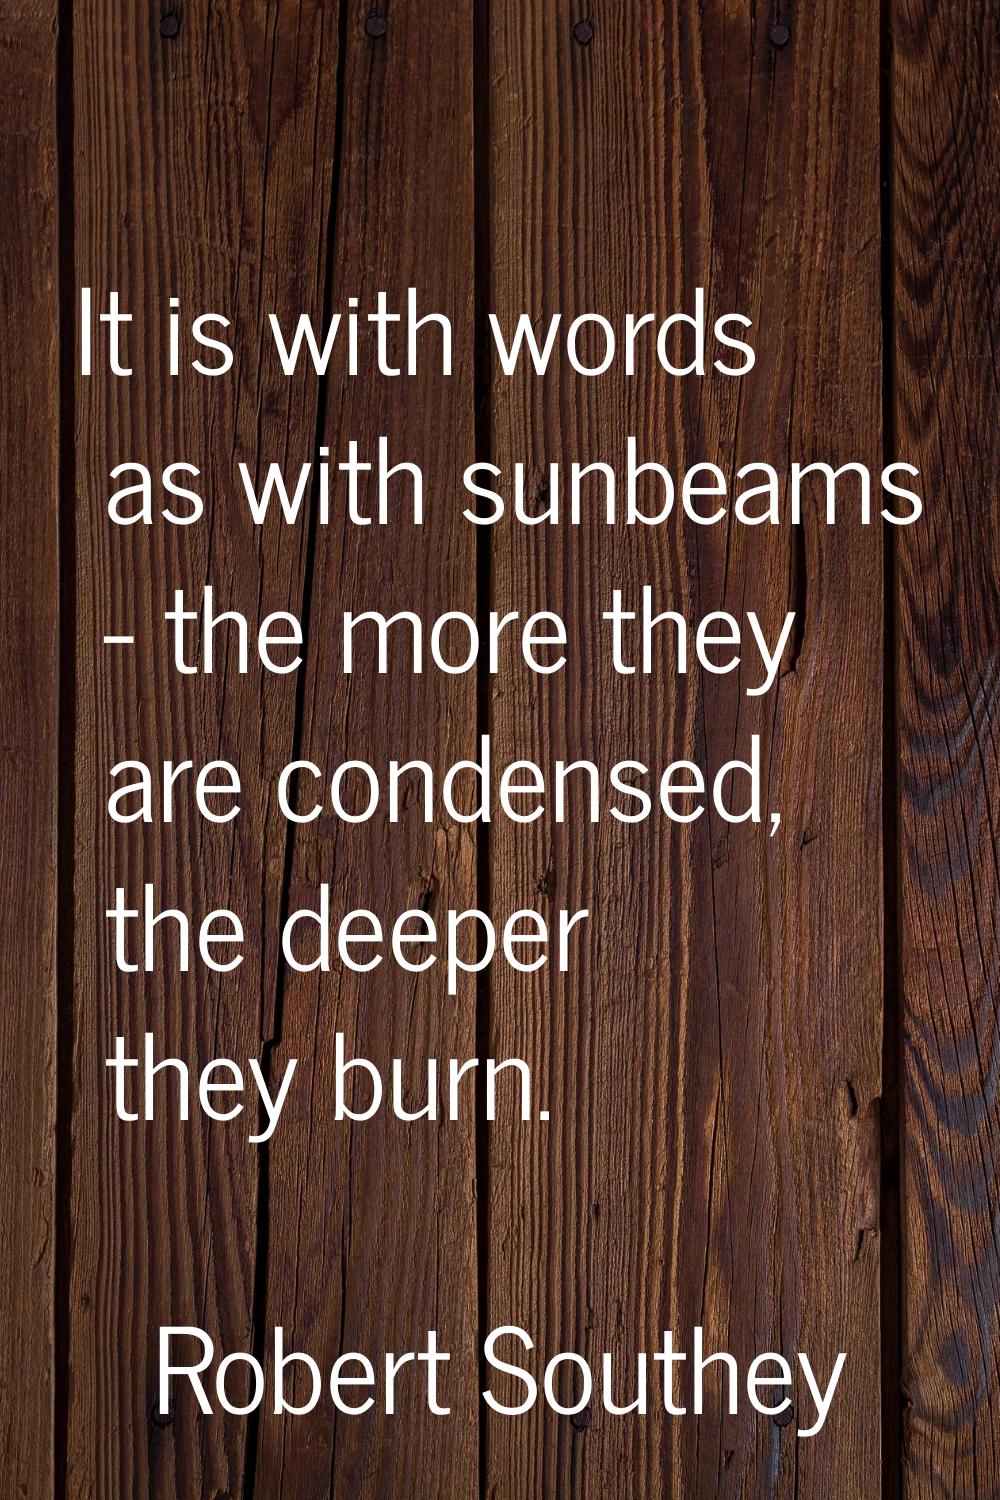 It is with words as with sunbeams - the more they are condensed, the deeper they burn.